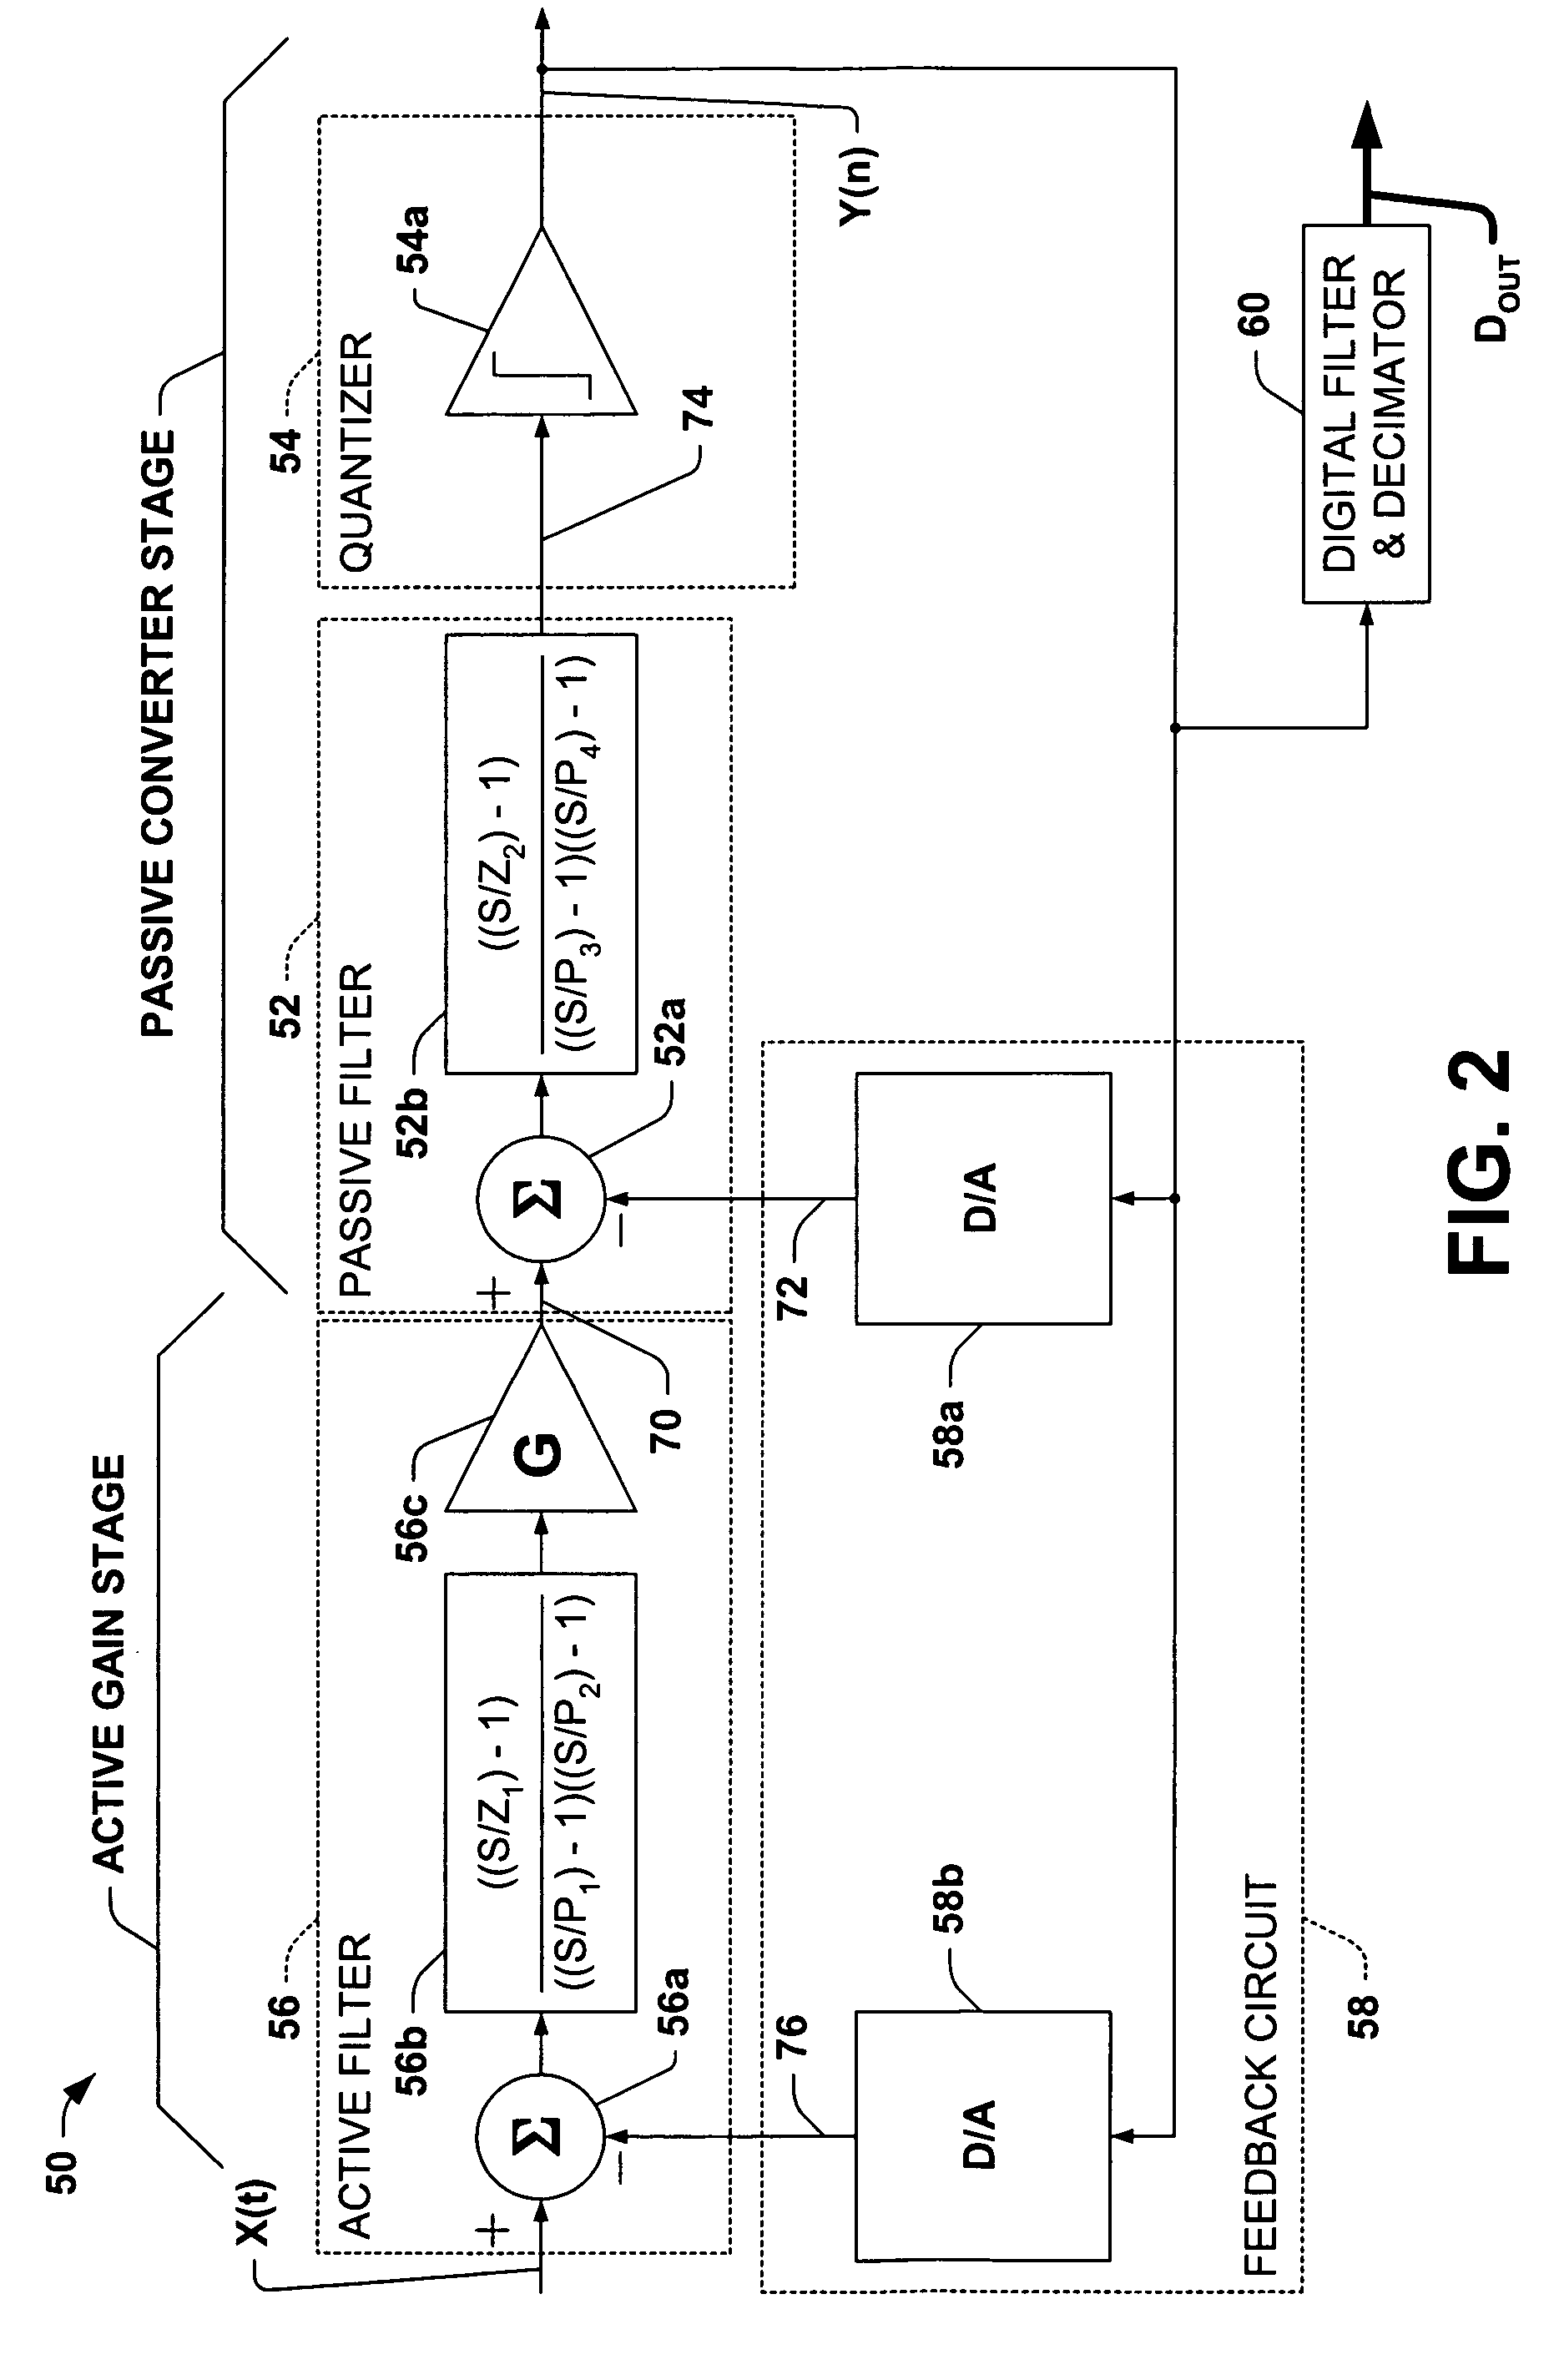 Continuous time fourth order delta sigma analog-to-digital converter